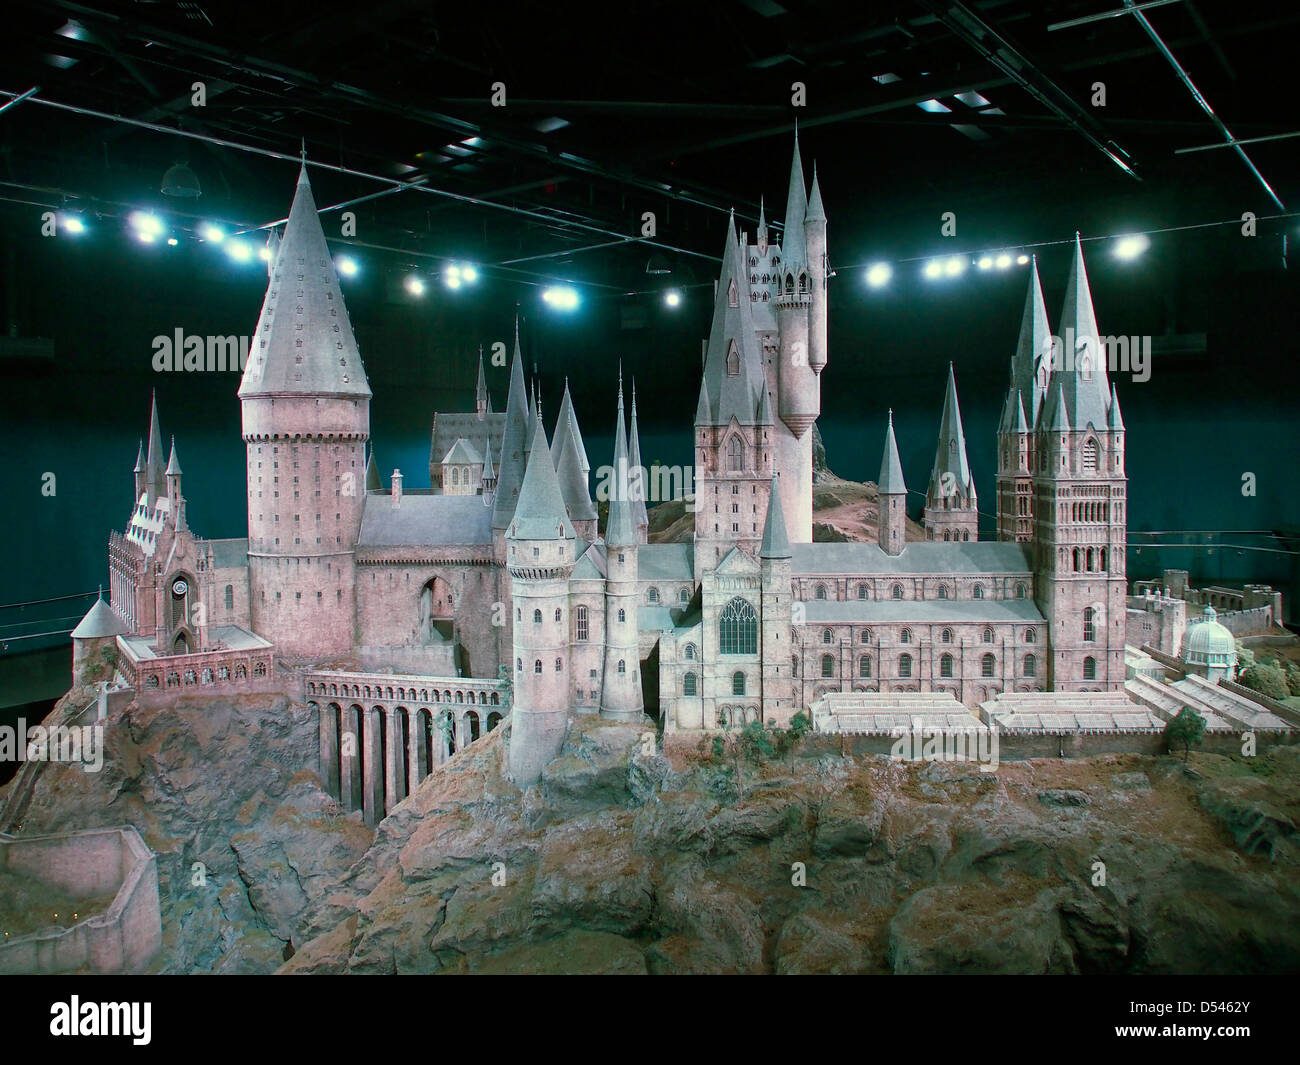 The Origins of Hogwarts School of Witchcraft and Wizardry